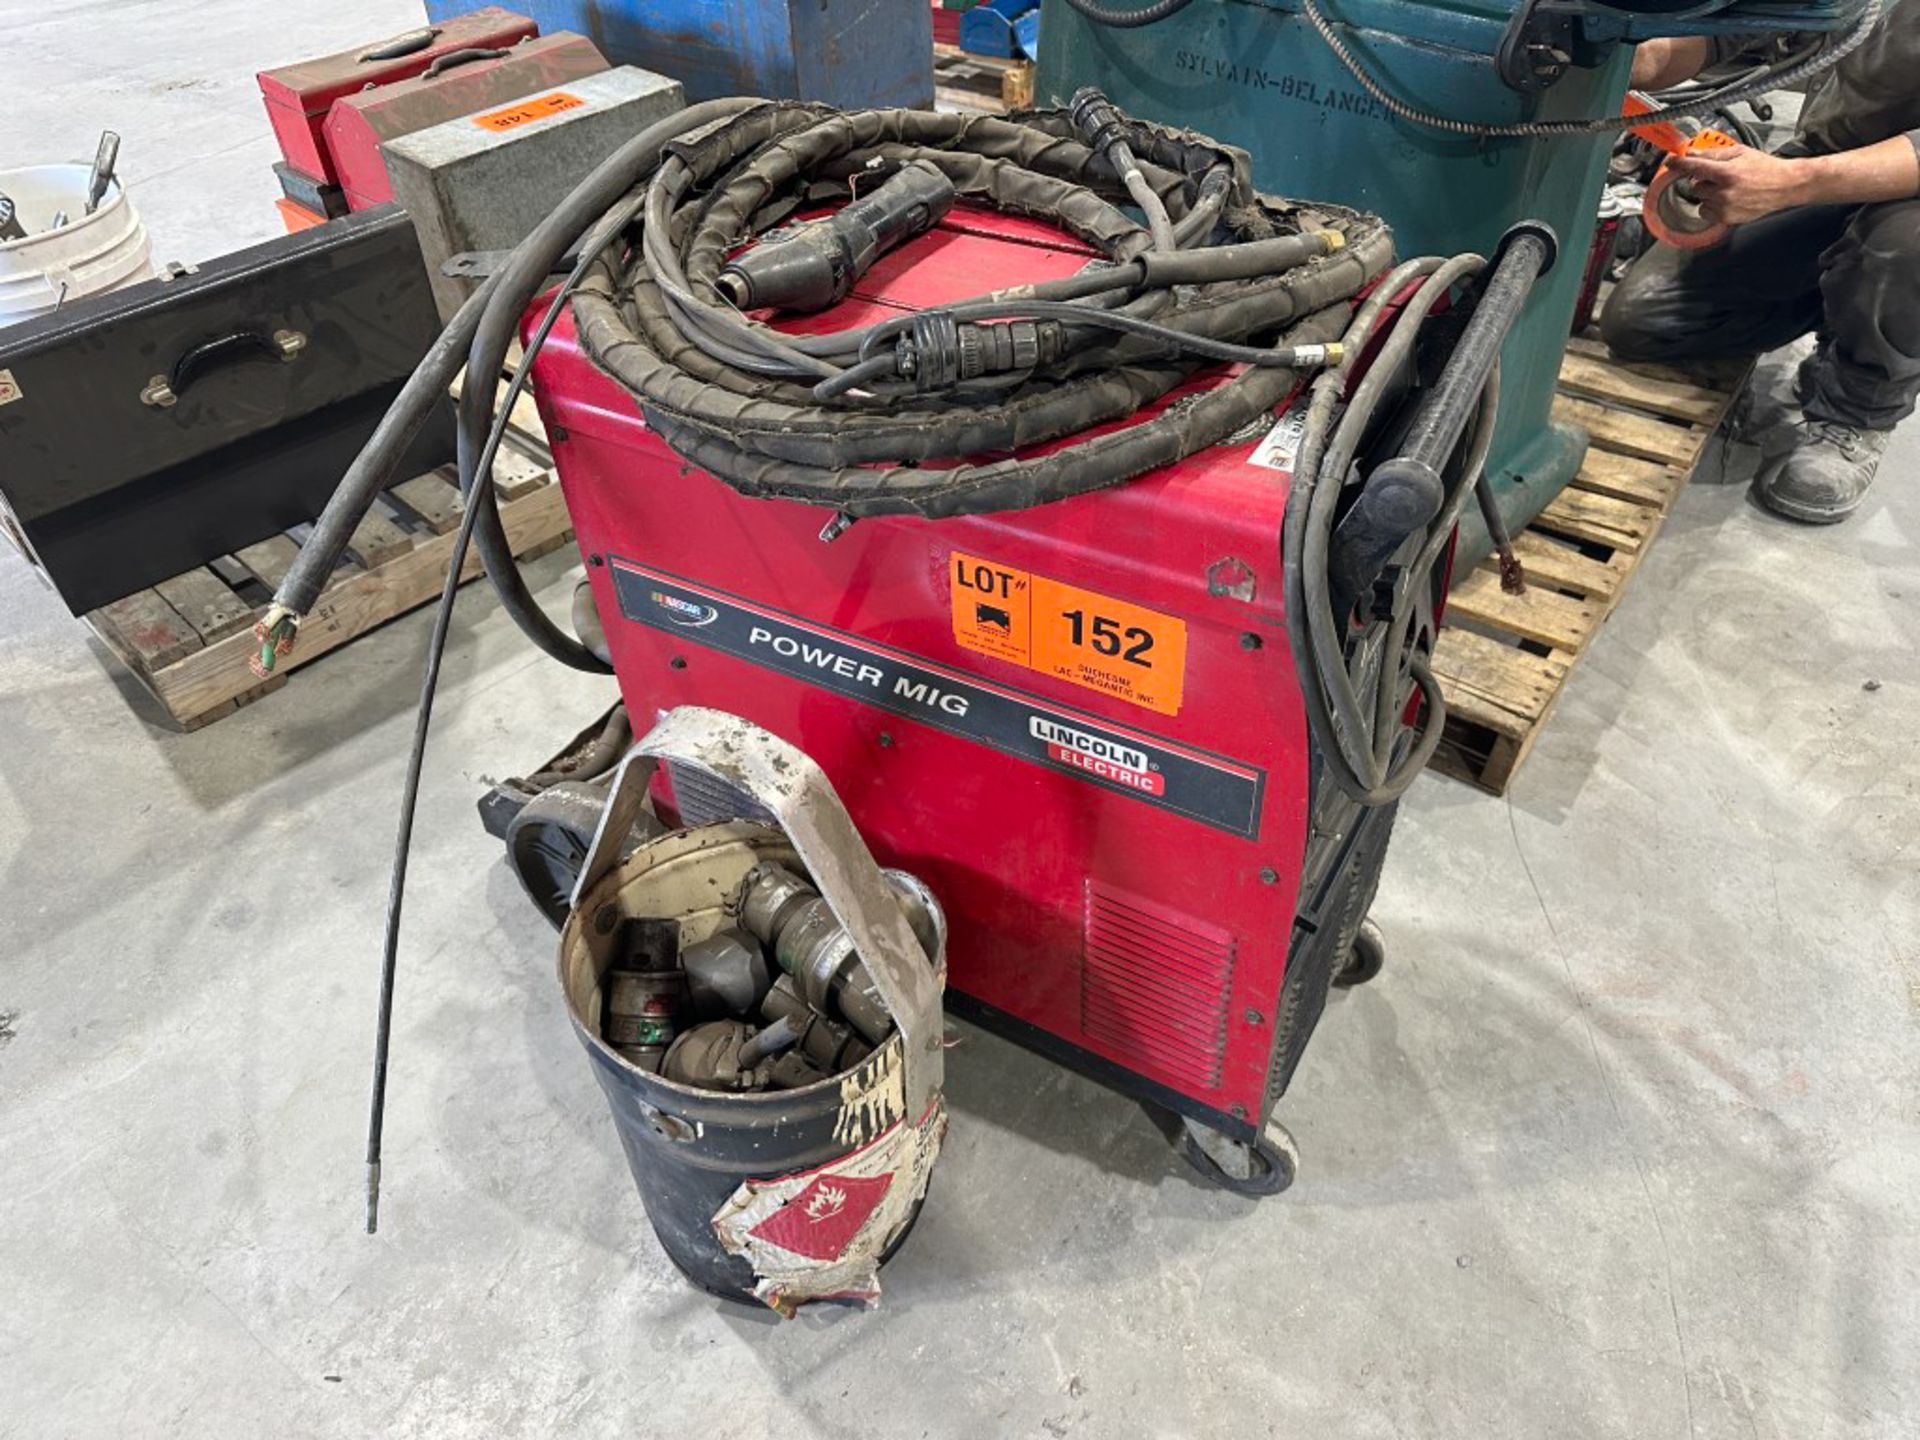 LINCOLN POWER MIG 300 portable MIG welder with cables and gun, s/n n/a